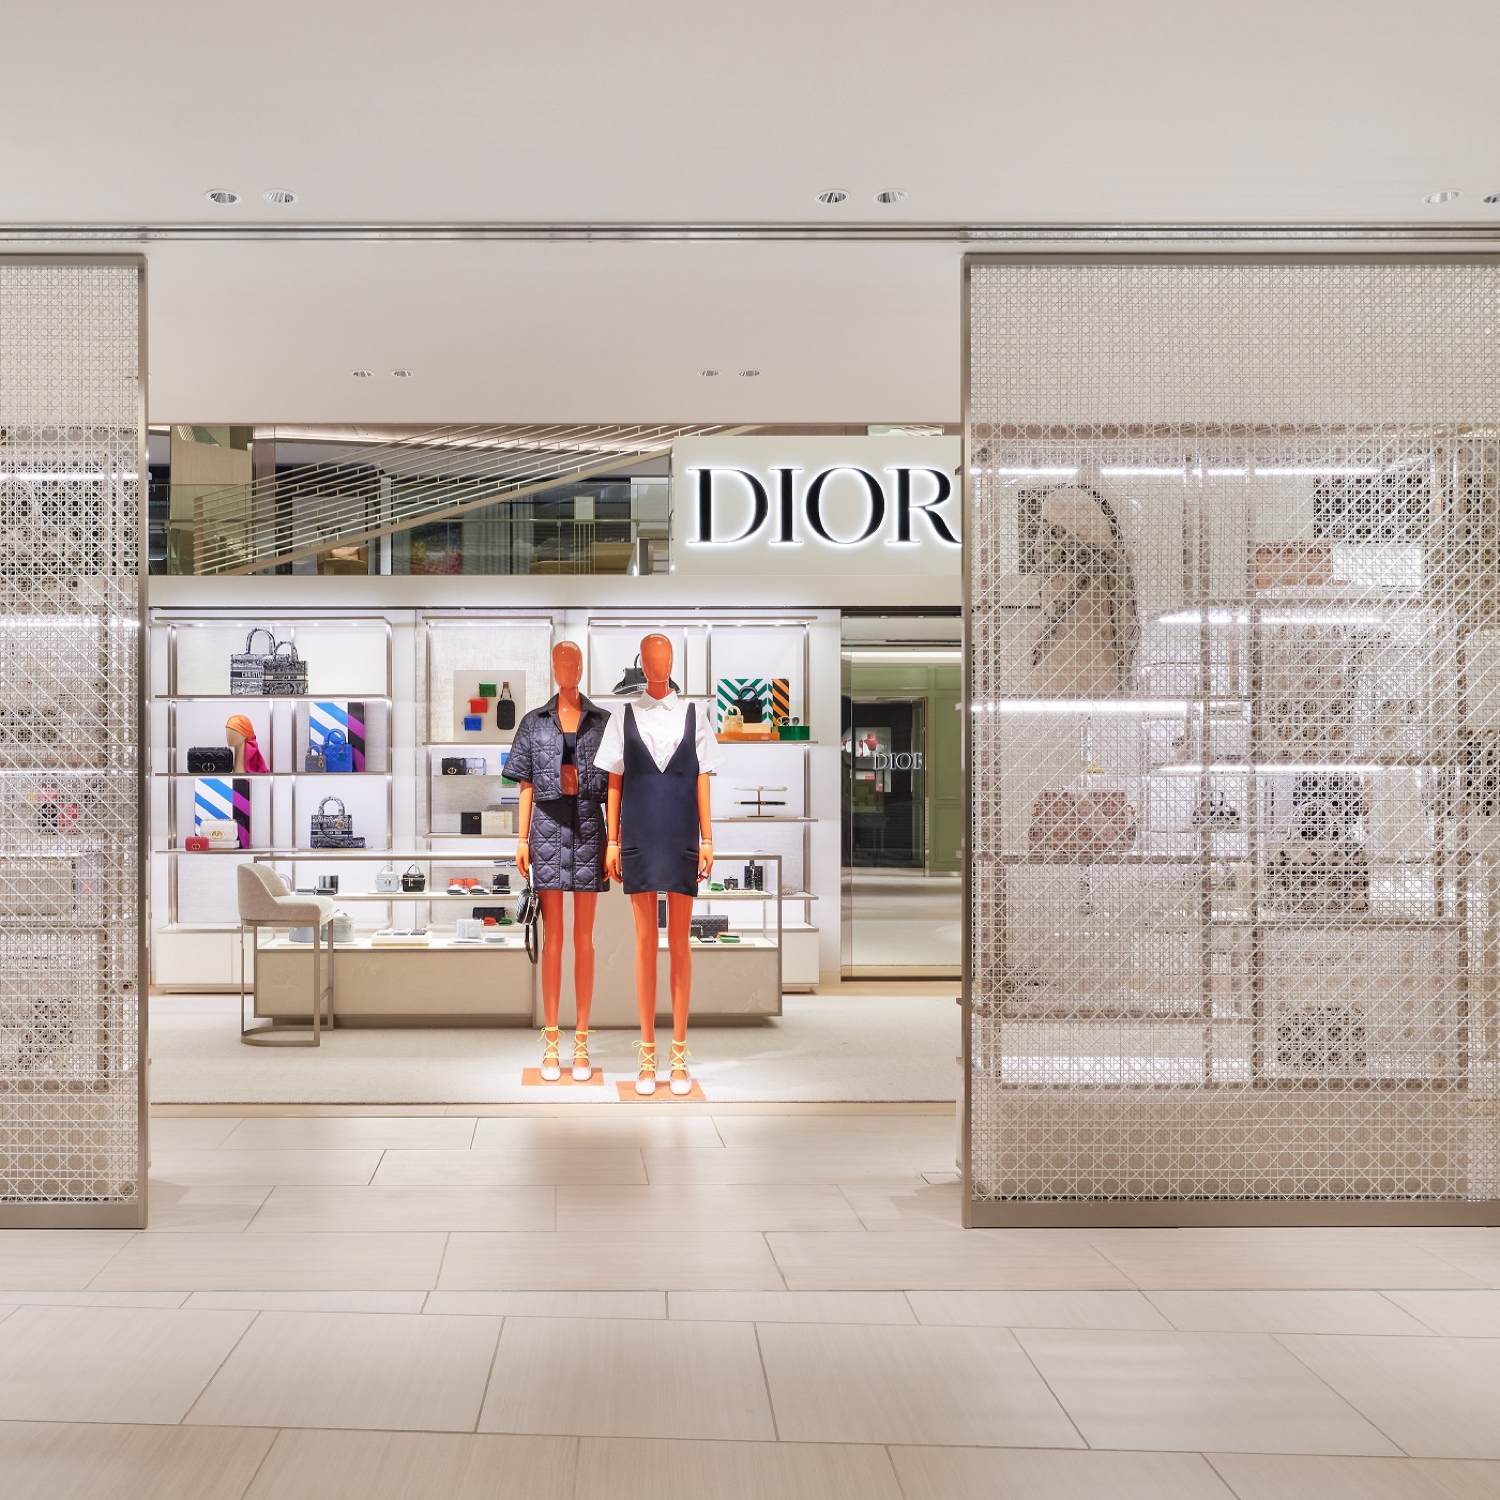 Tokyo: Dior store opening | superfuture®